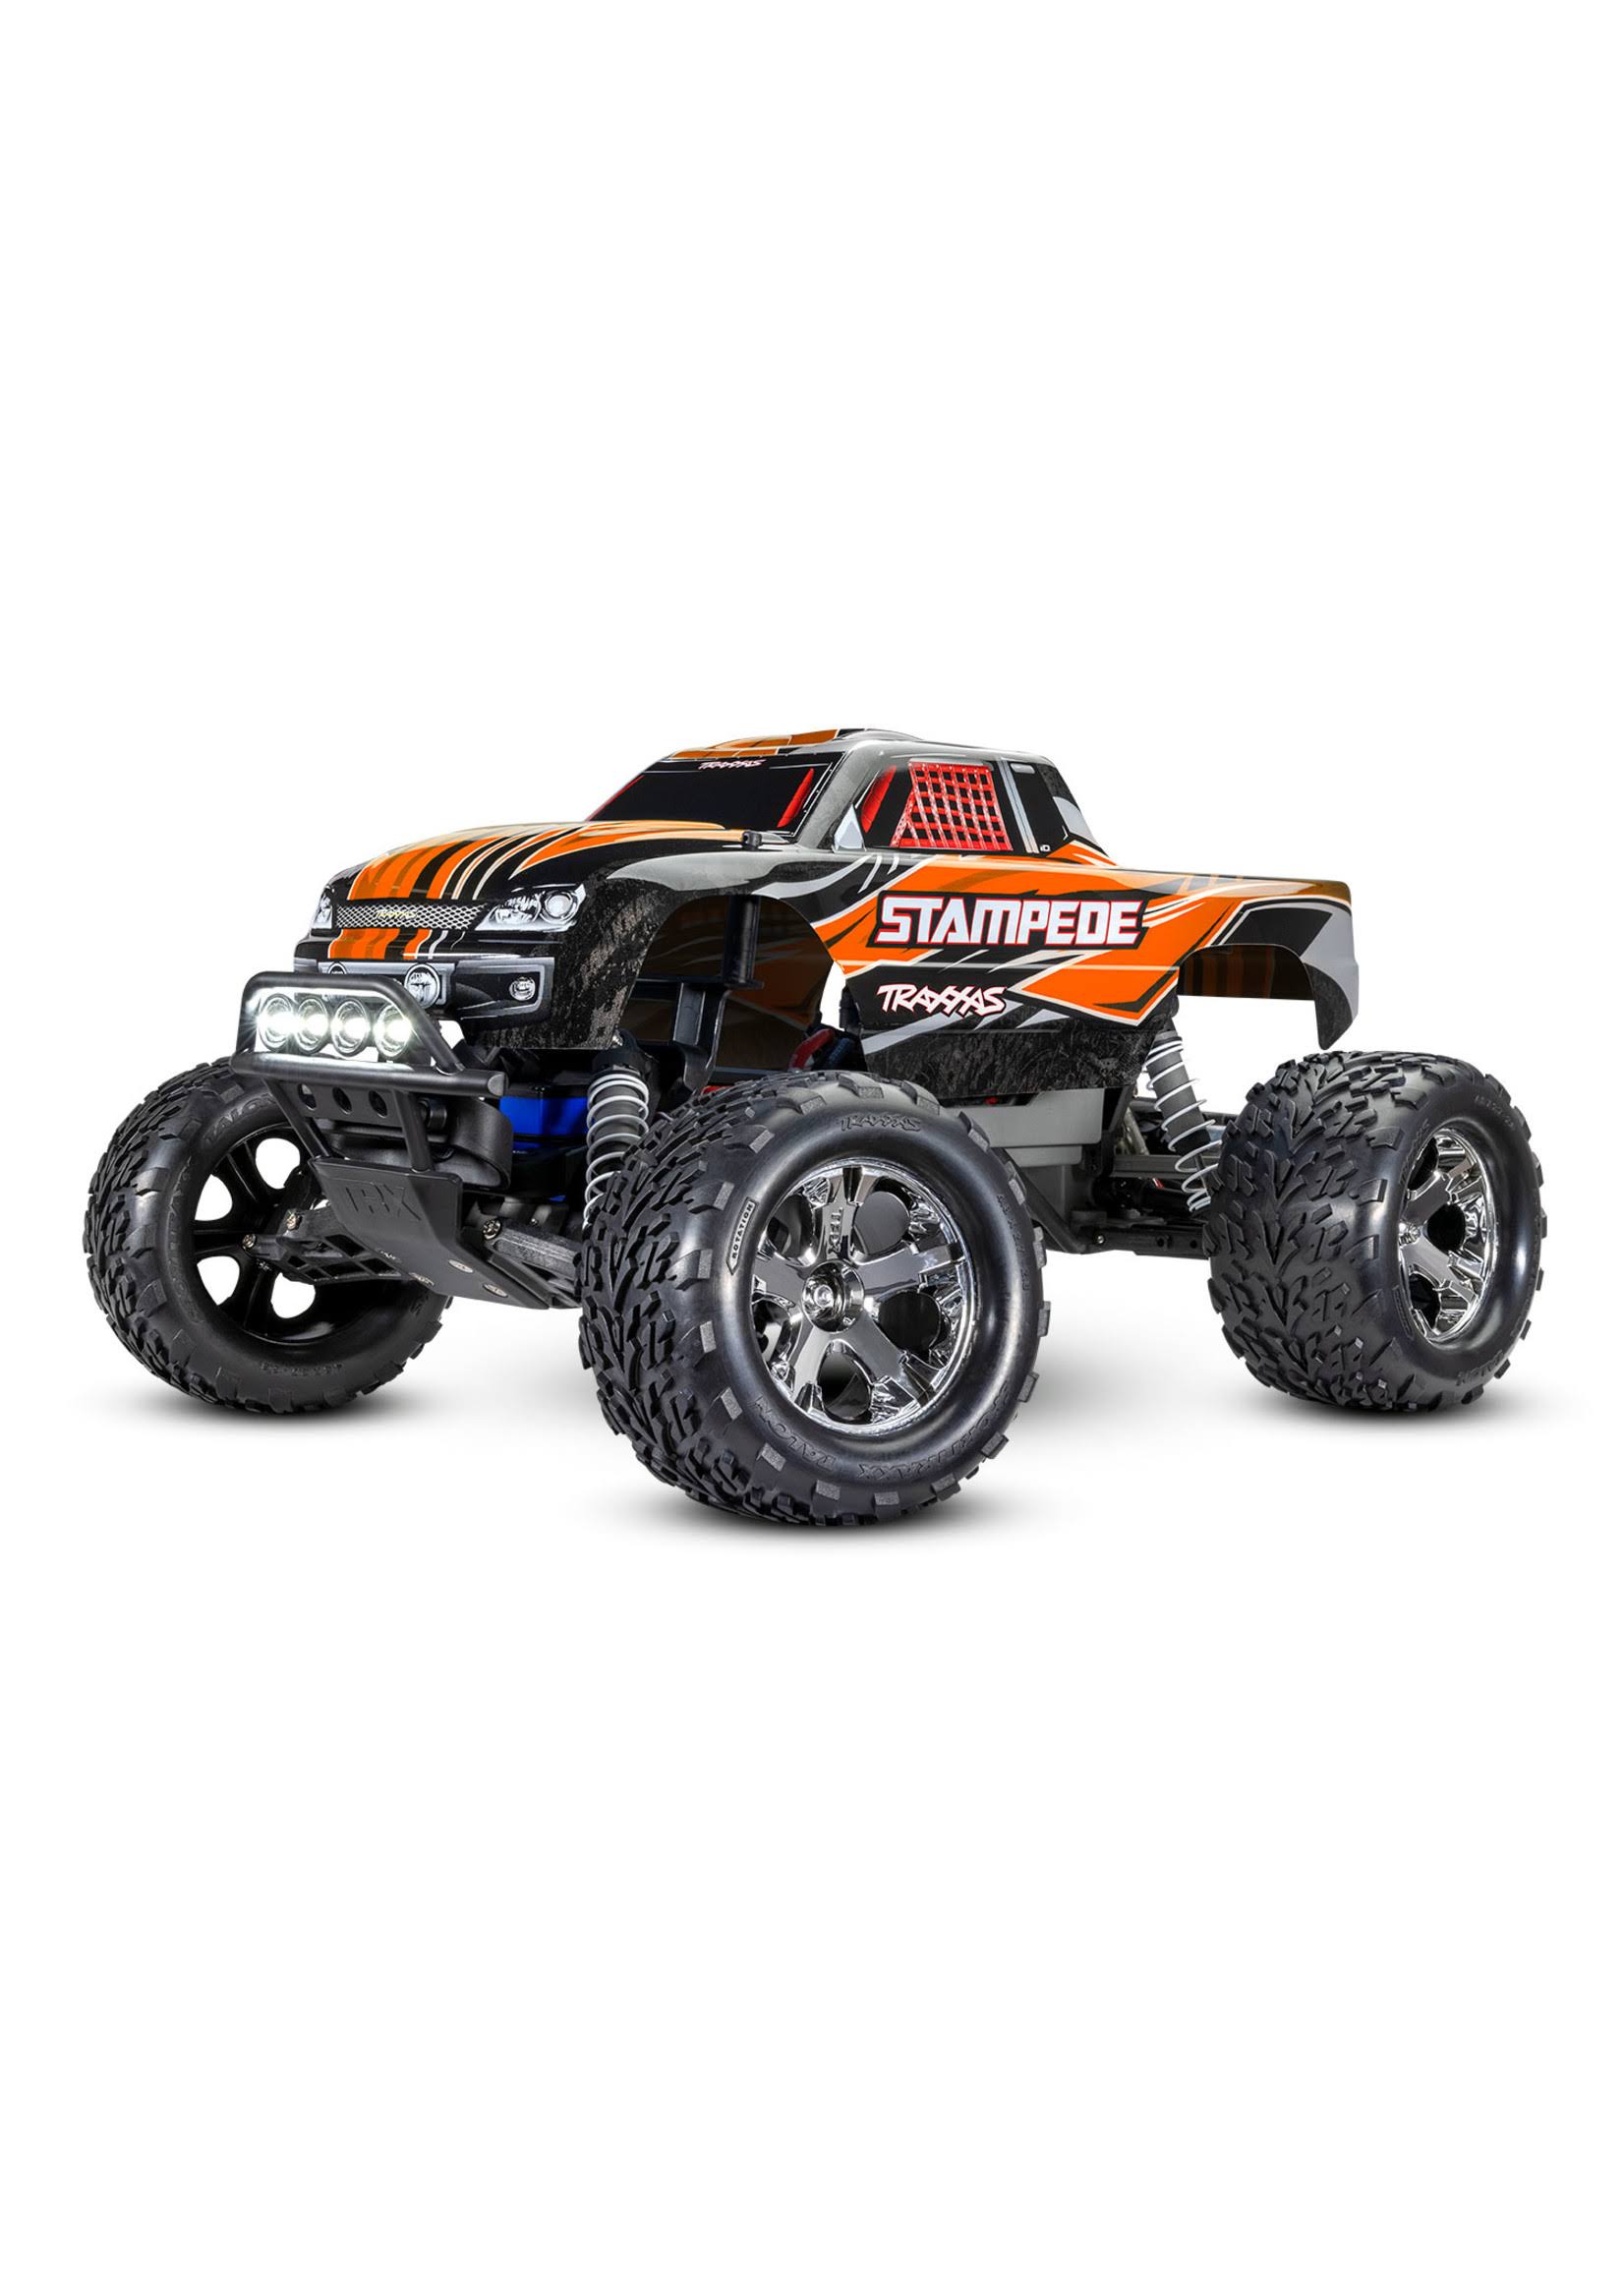 Traxxas Stampede 1/10 2wd XL-5 With Charger Battery & LED Lights Orange